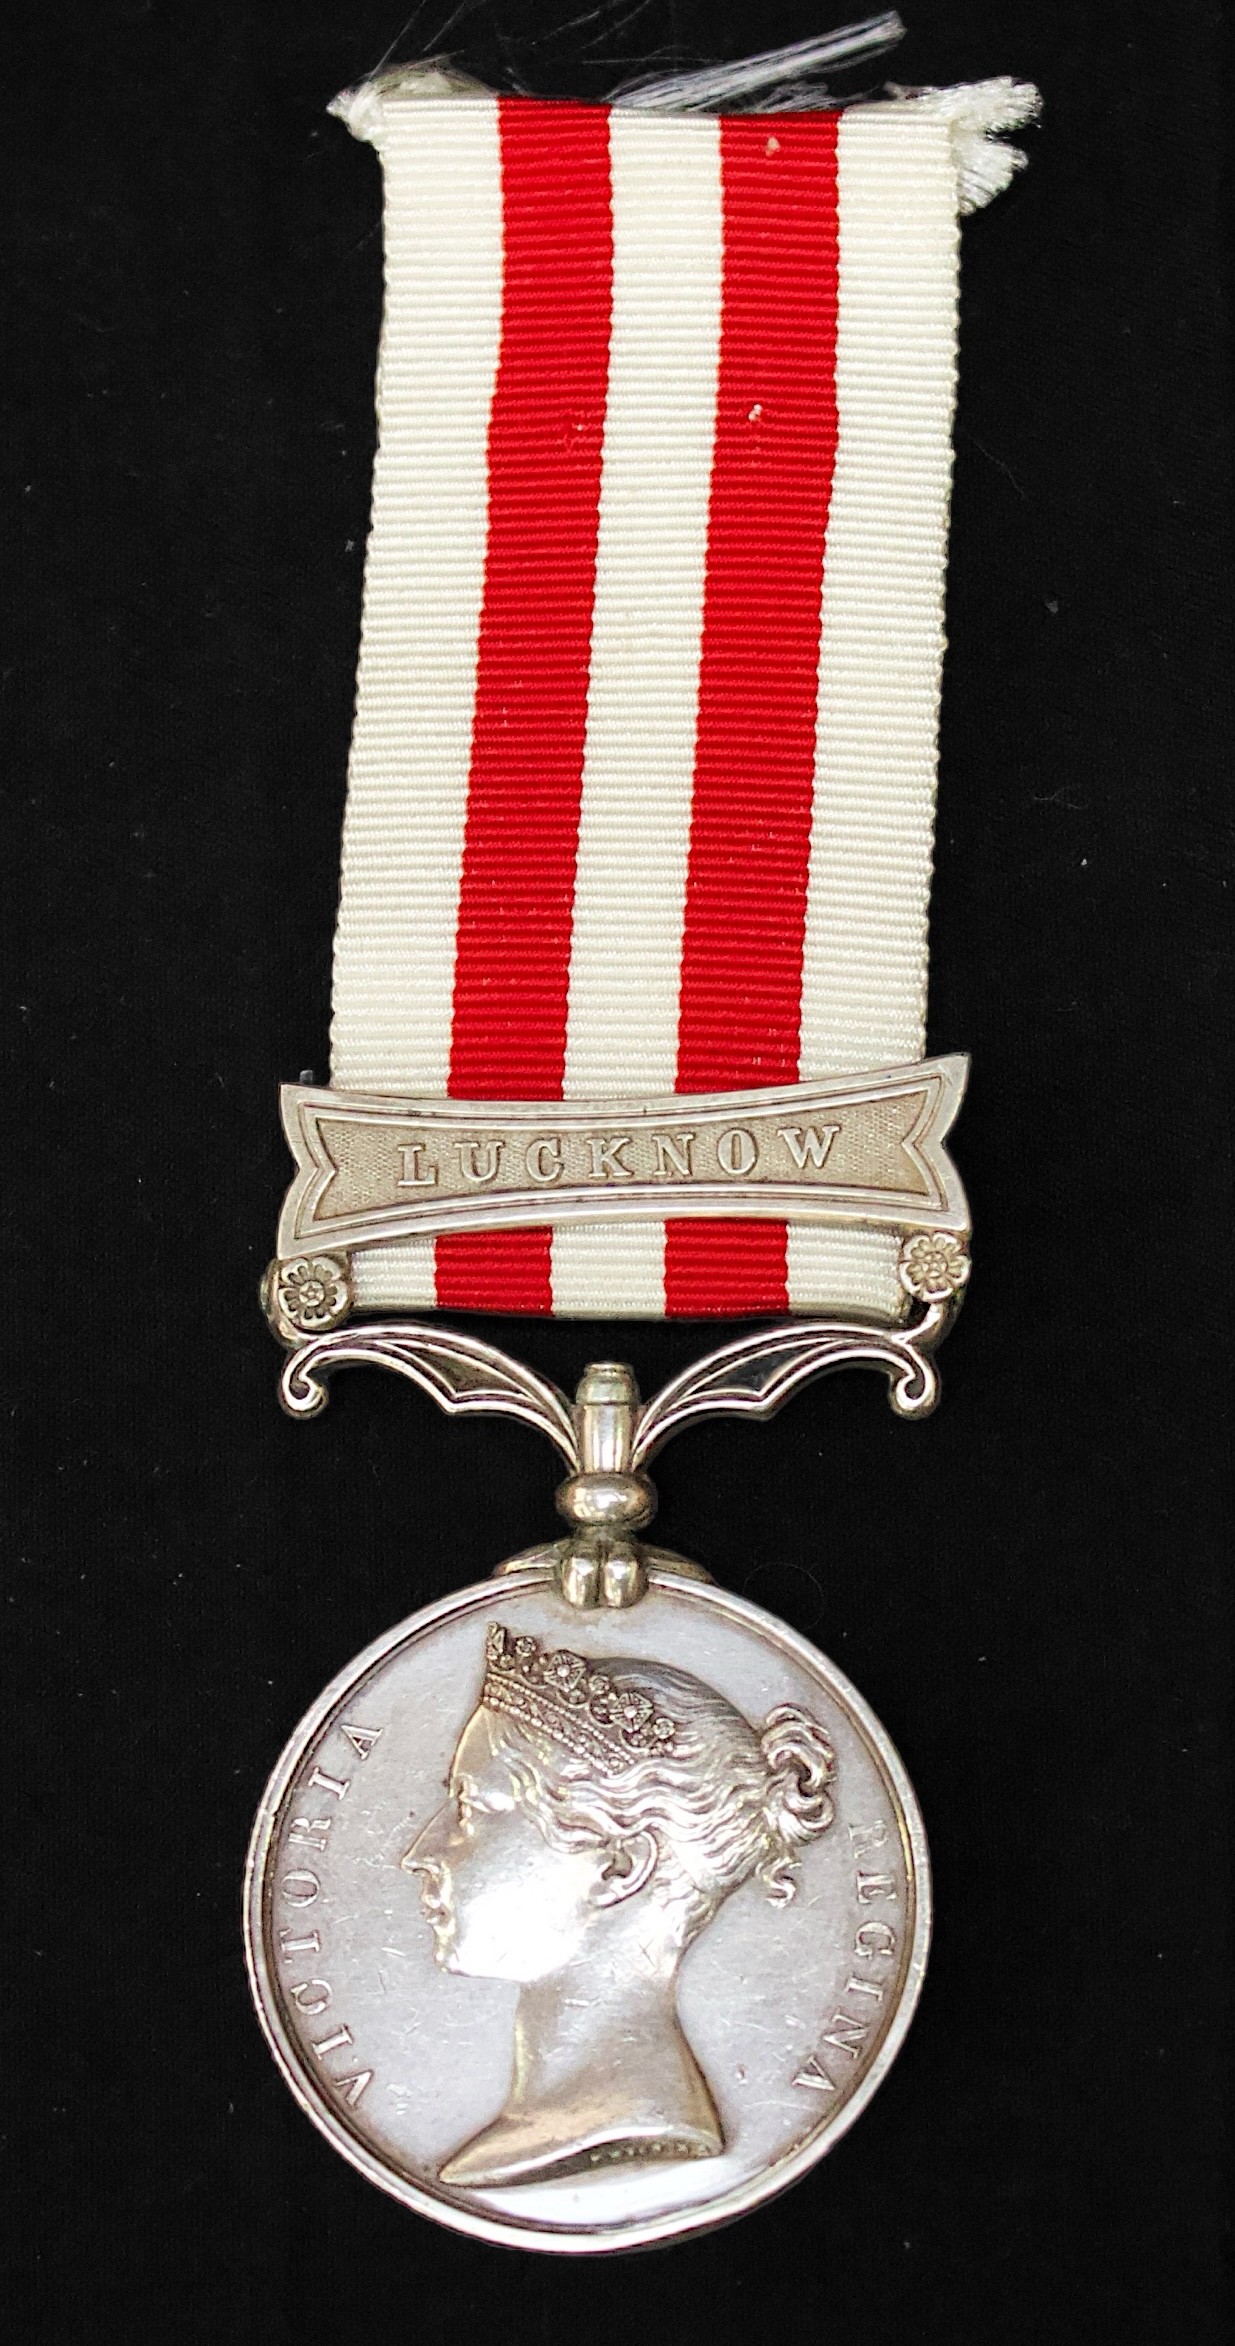 British Army Indian Mutiny Medal 1857-1858, with Lucknow Clasp, to Thomas Harding 3rd Battalion